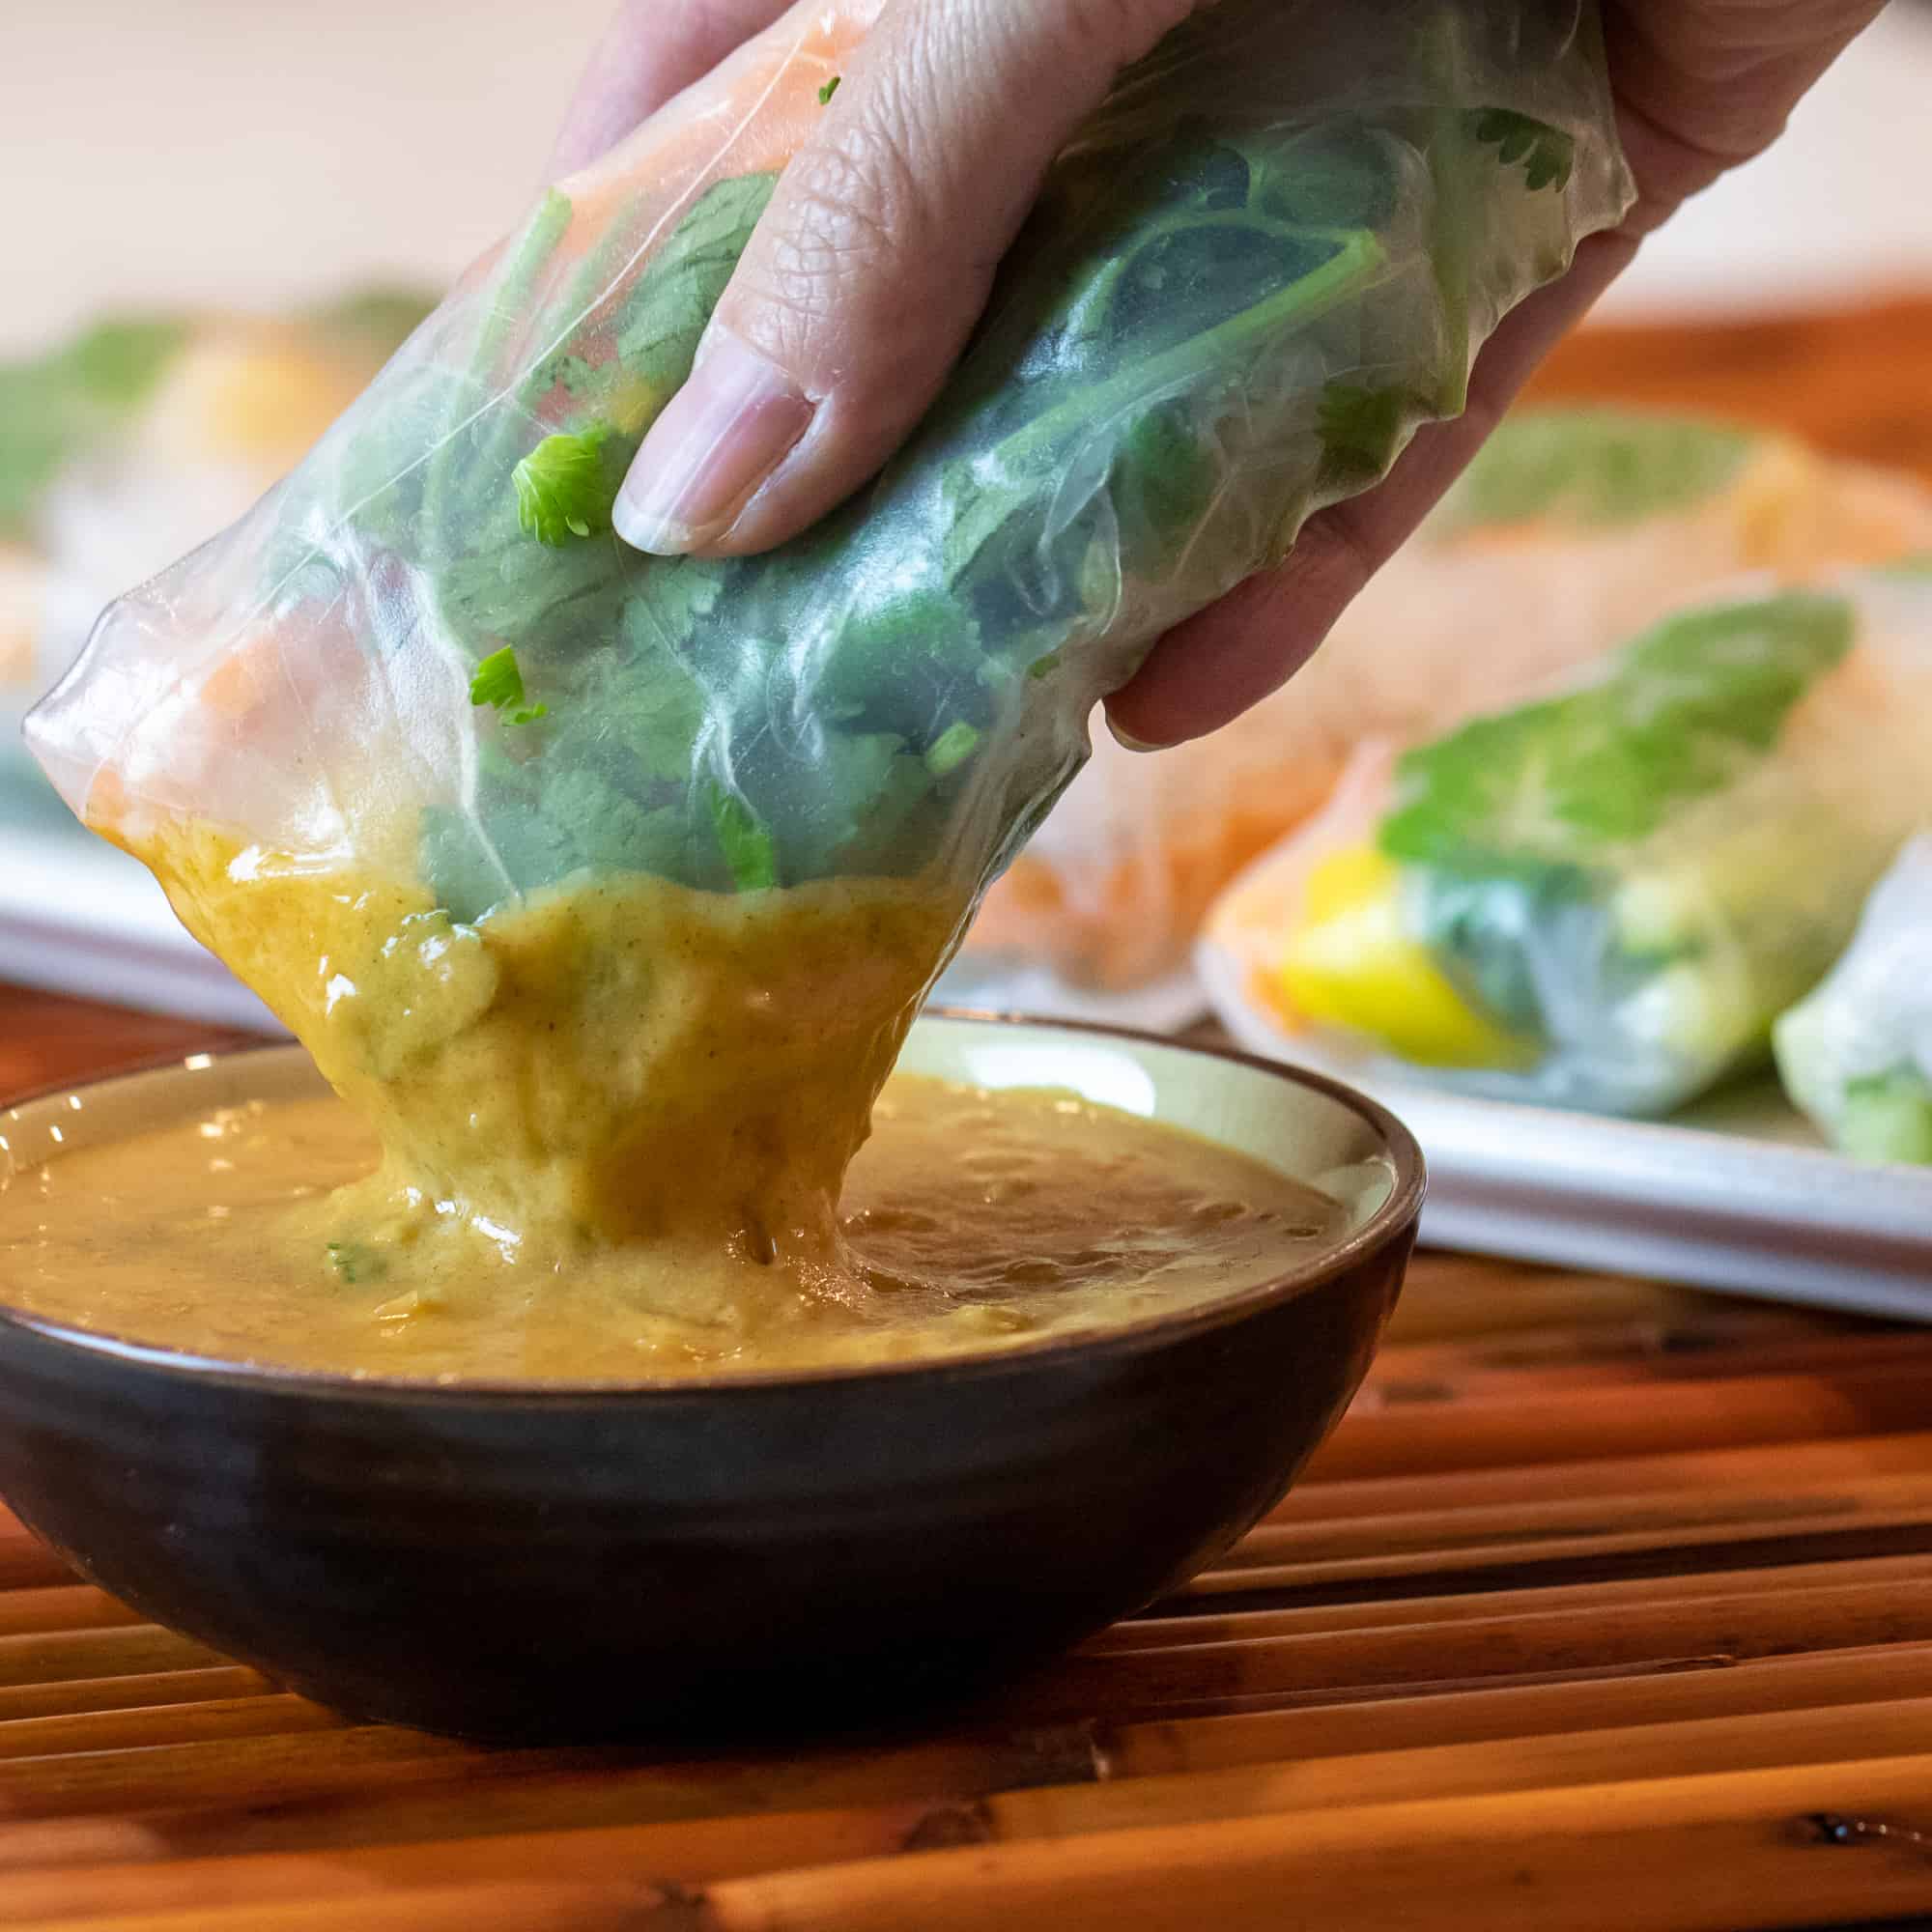 Dip the Vietnamese cold spring rolls in Thai peanut sauce or sweet chili sauce.